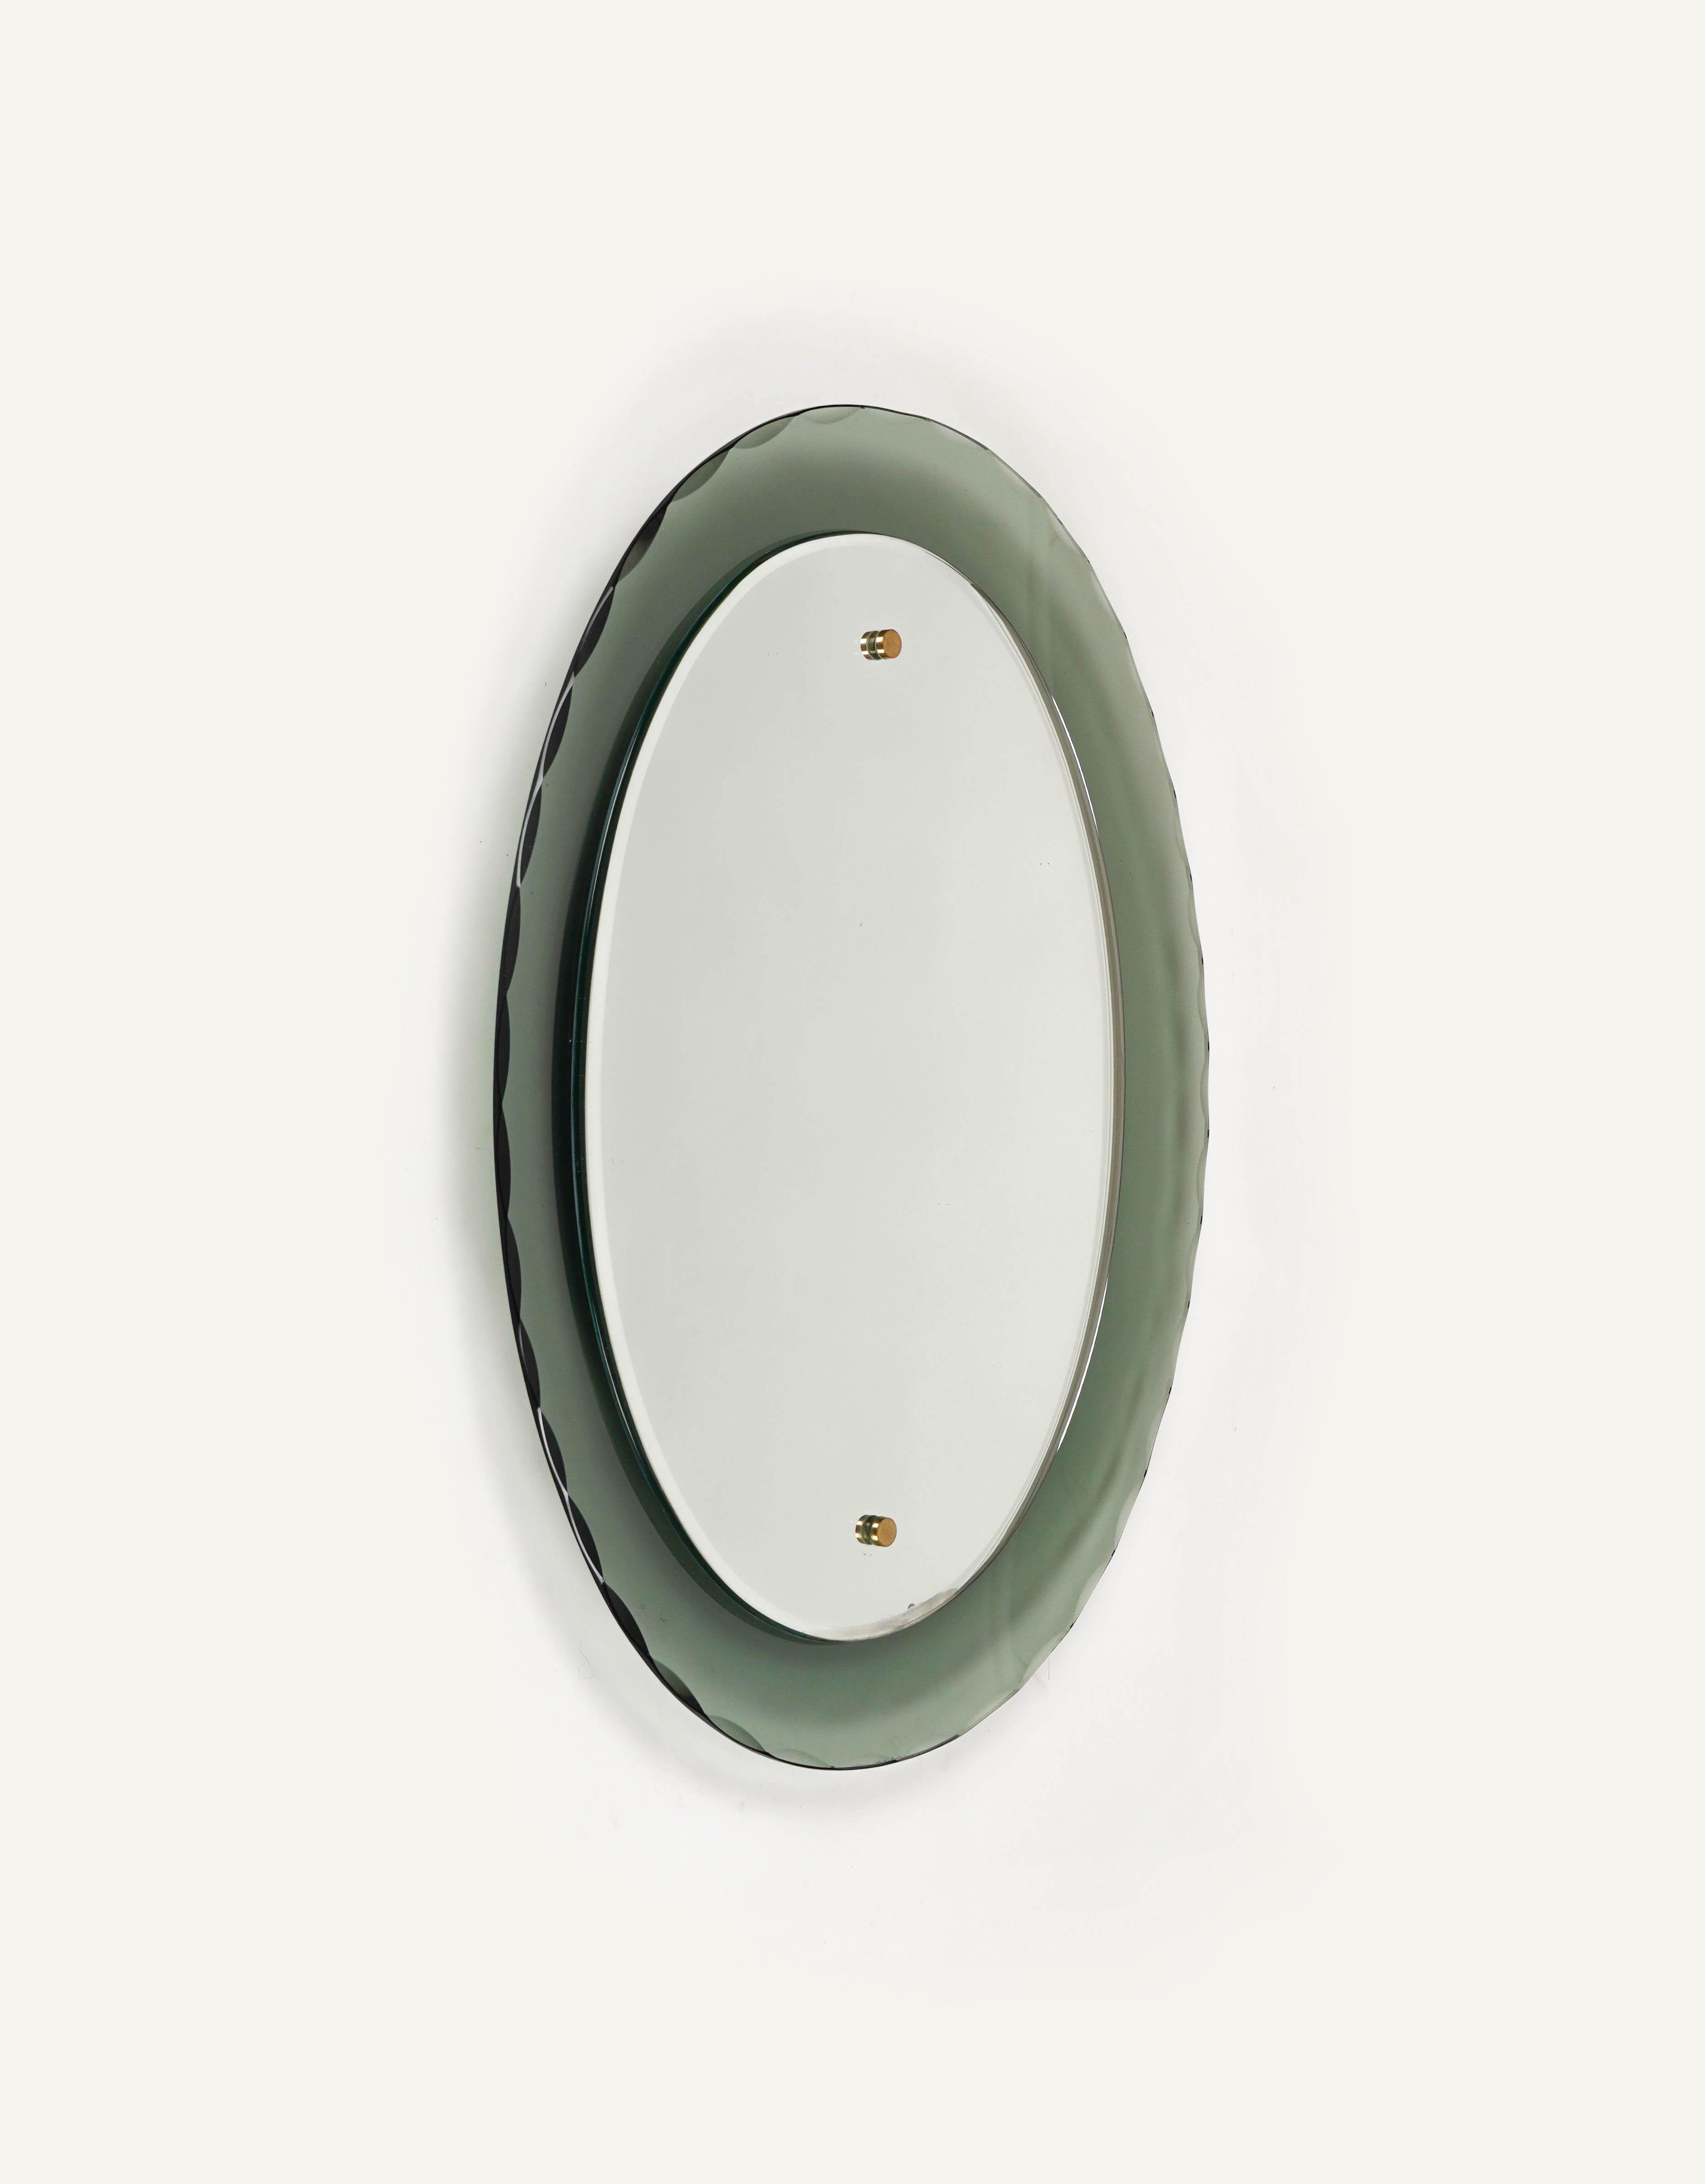 Beautiful oval wall mirror curved whit smoked carved glass frame by Cristal Arte.

Made in Italy in the 1960s.

The mirror is very well-made, heavy and in good vintage condition.  

The mirror would be perfect for a bedroom, dressing room, cloakroom